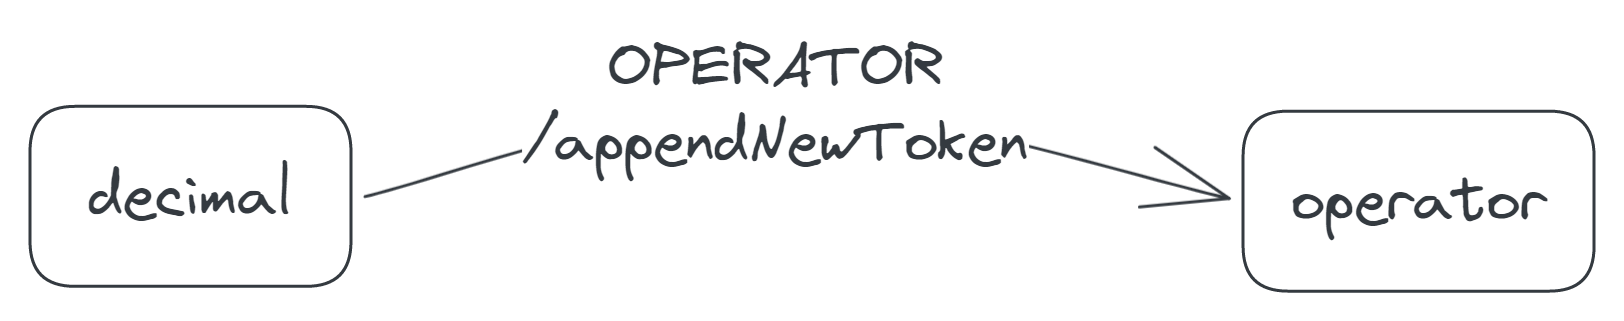 A transition labelled 'OPERATOR/appendNewToken', from the decimal to the operator state.